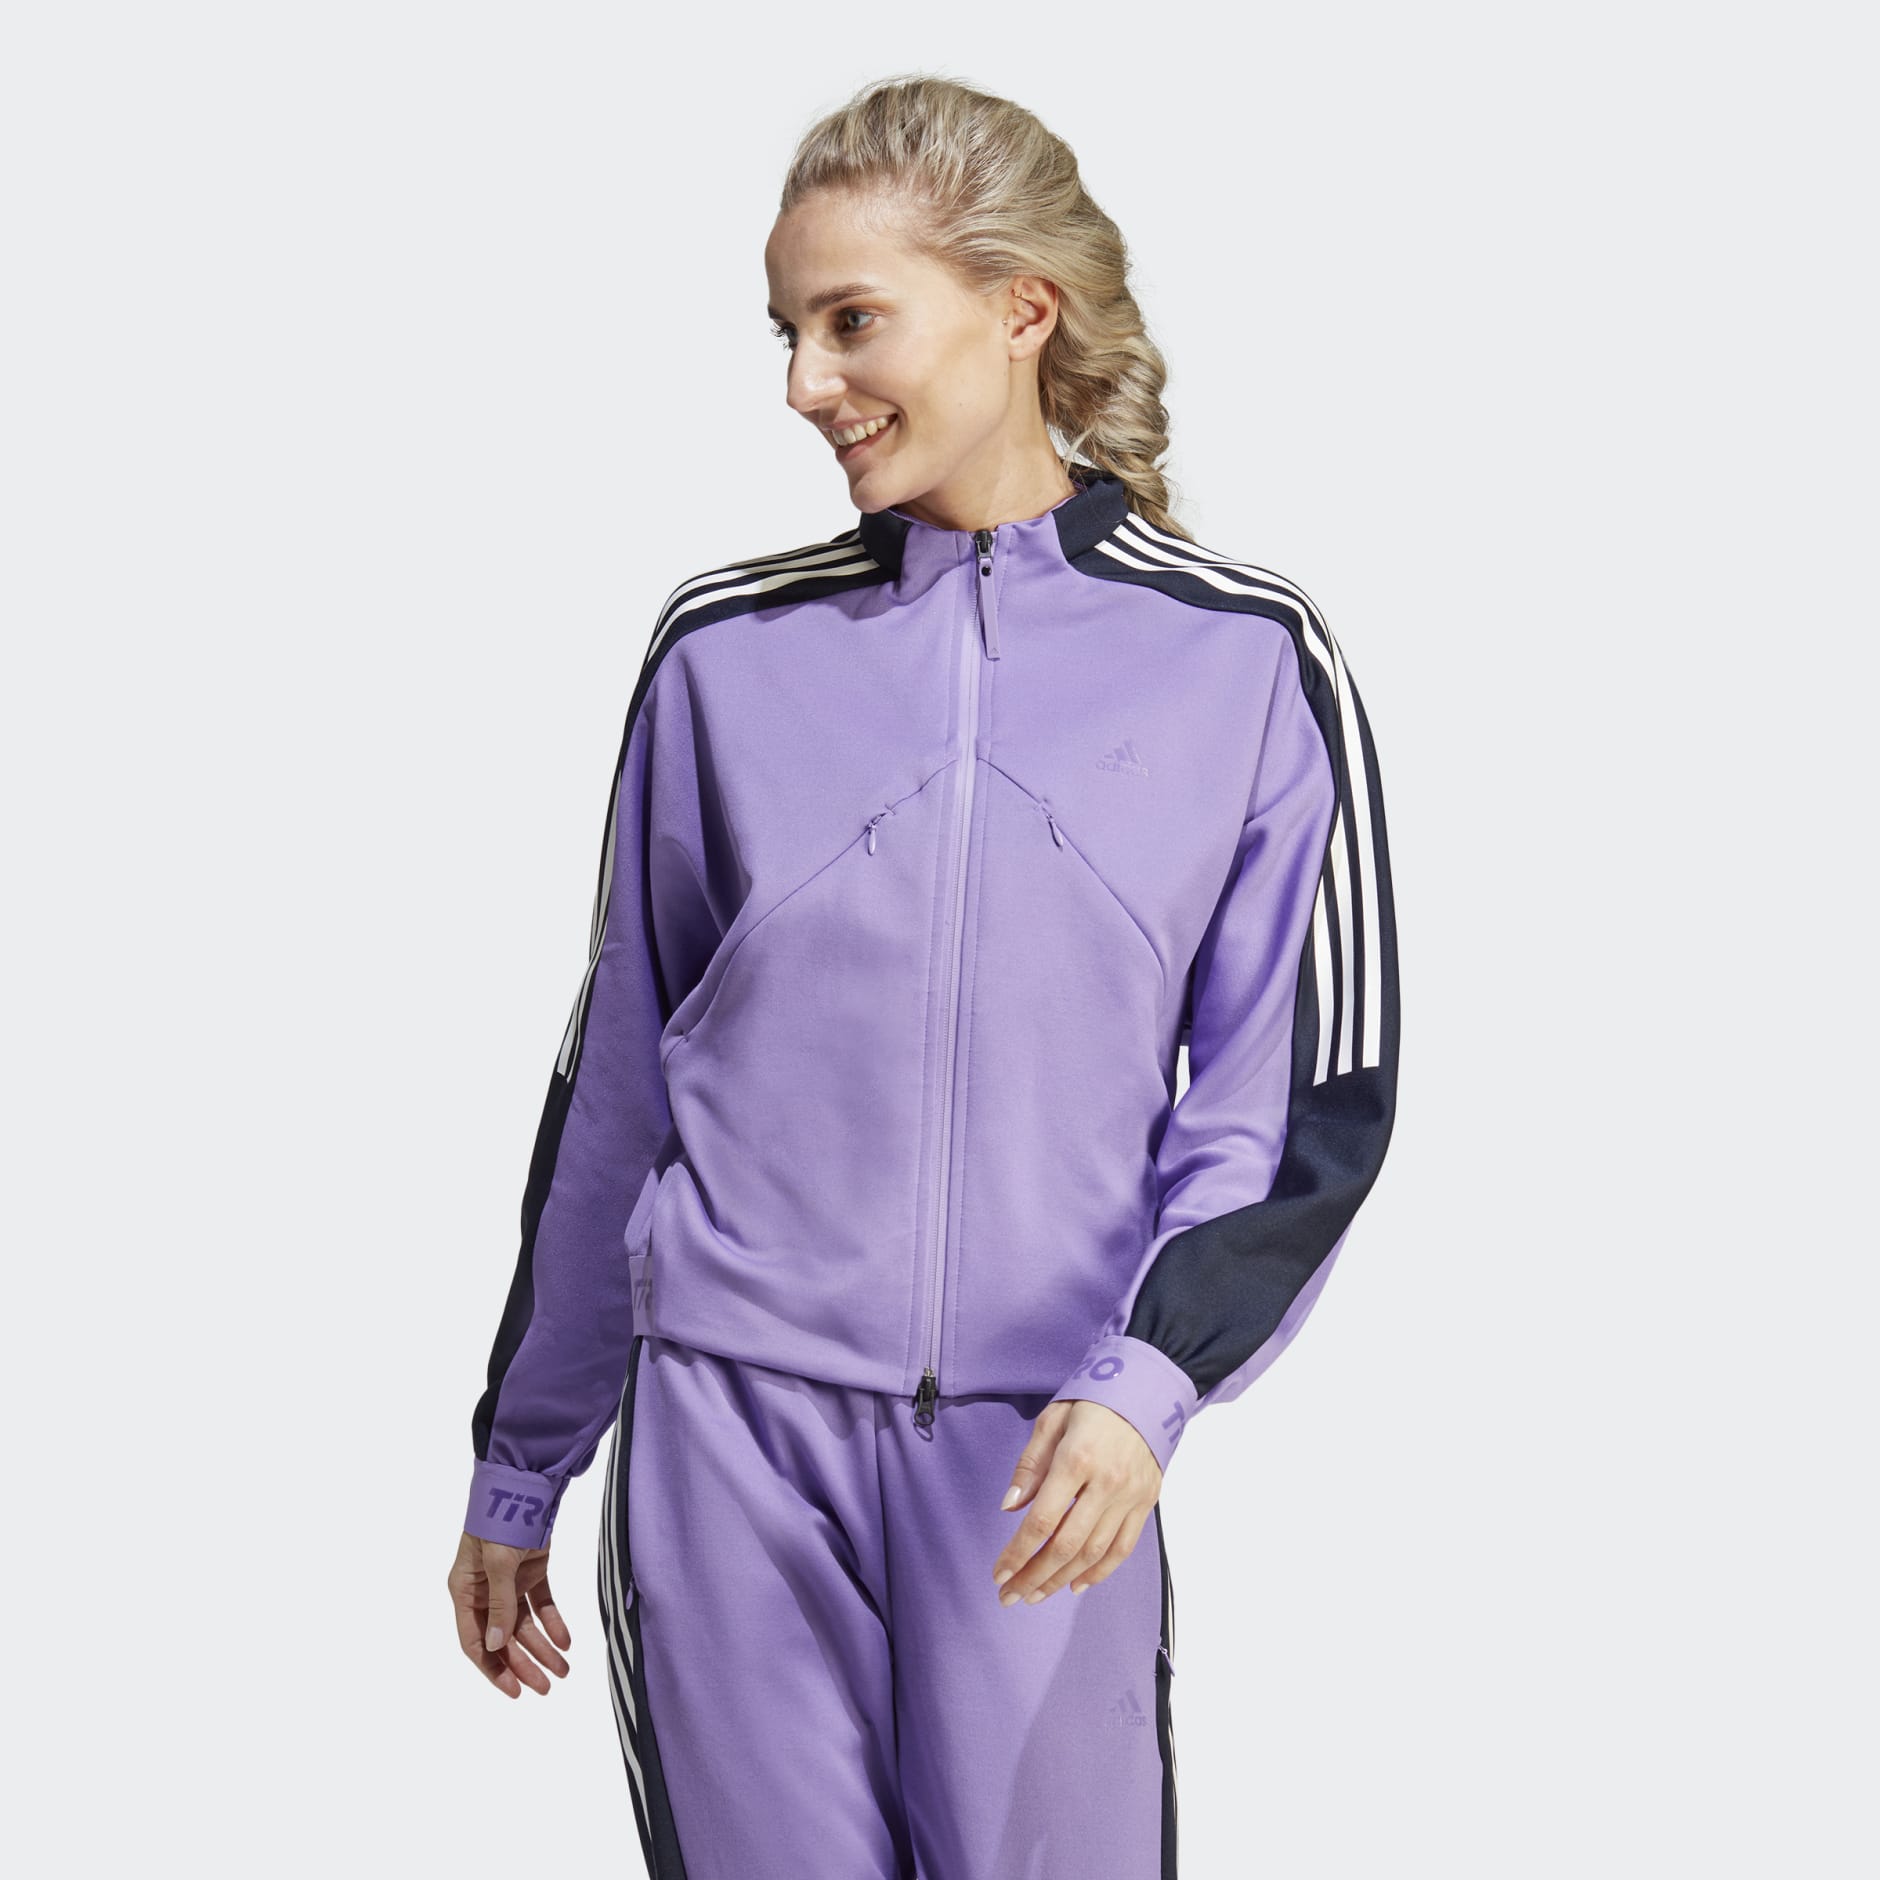 Clothing - Tiro Suit-Up Advanced Track Top - Purple | adidas South Africa